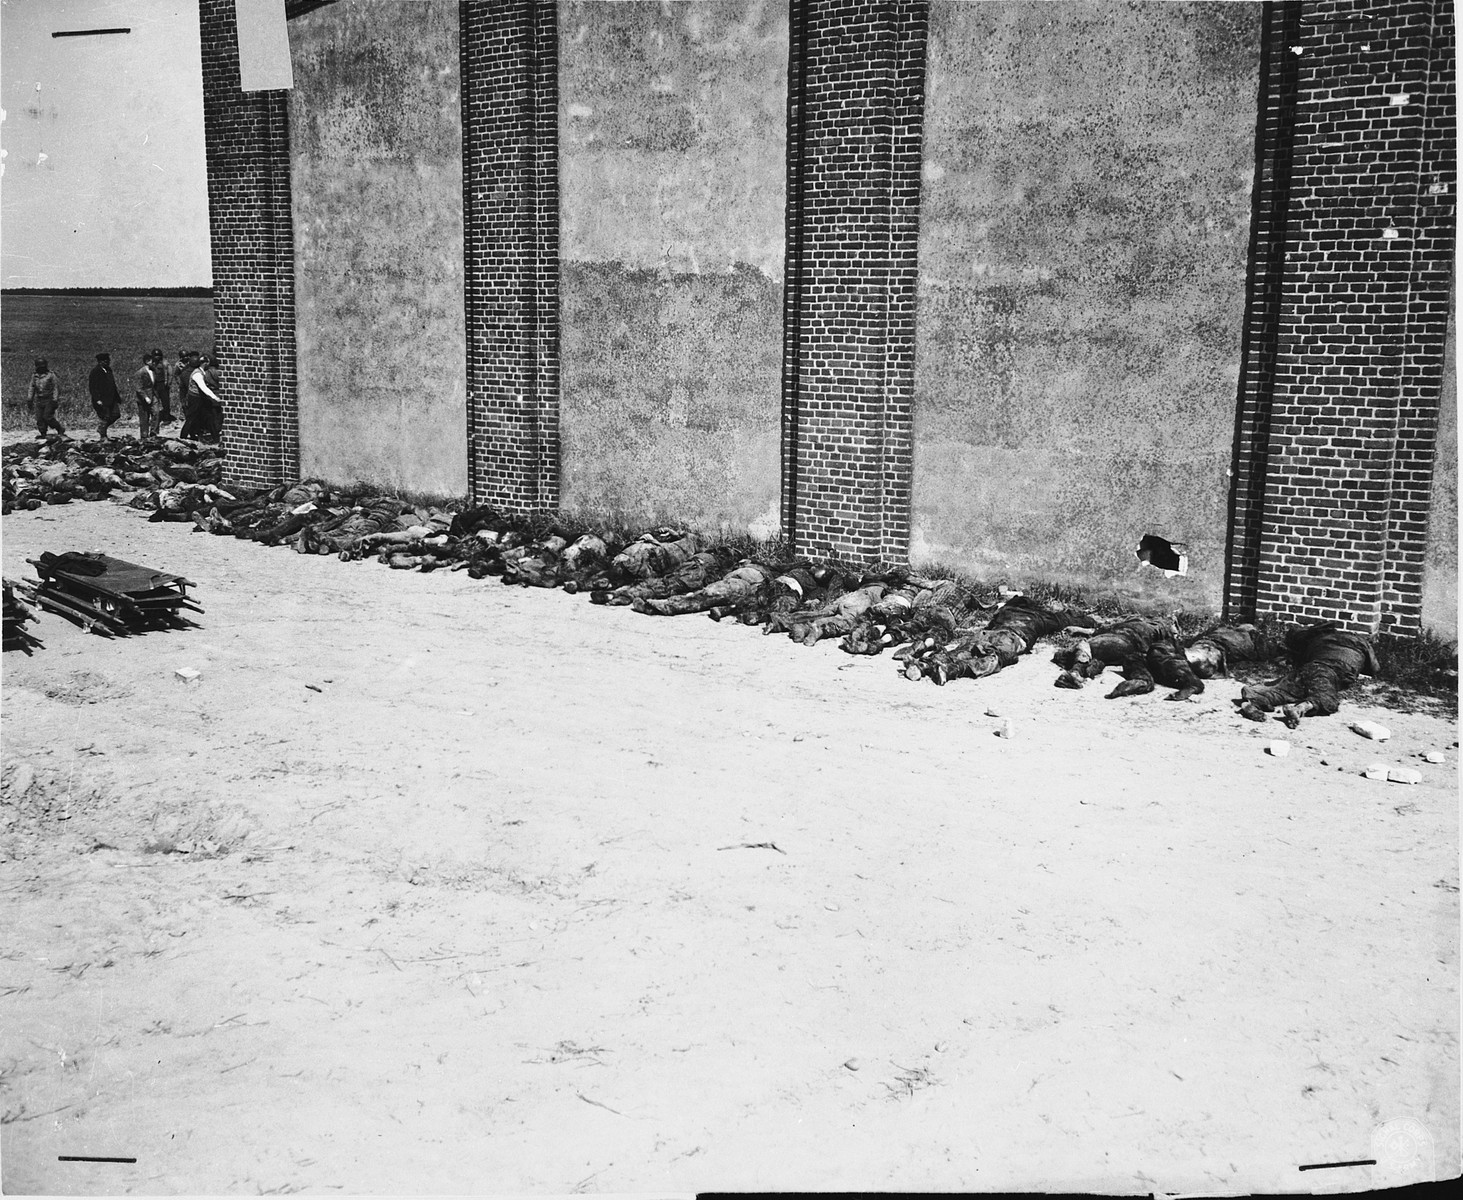 Corpses lined up on the west side of the barn with a visible hole supposedly made by a Panzerfaust.  In the background German civilians remove corpses from the barn.